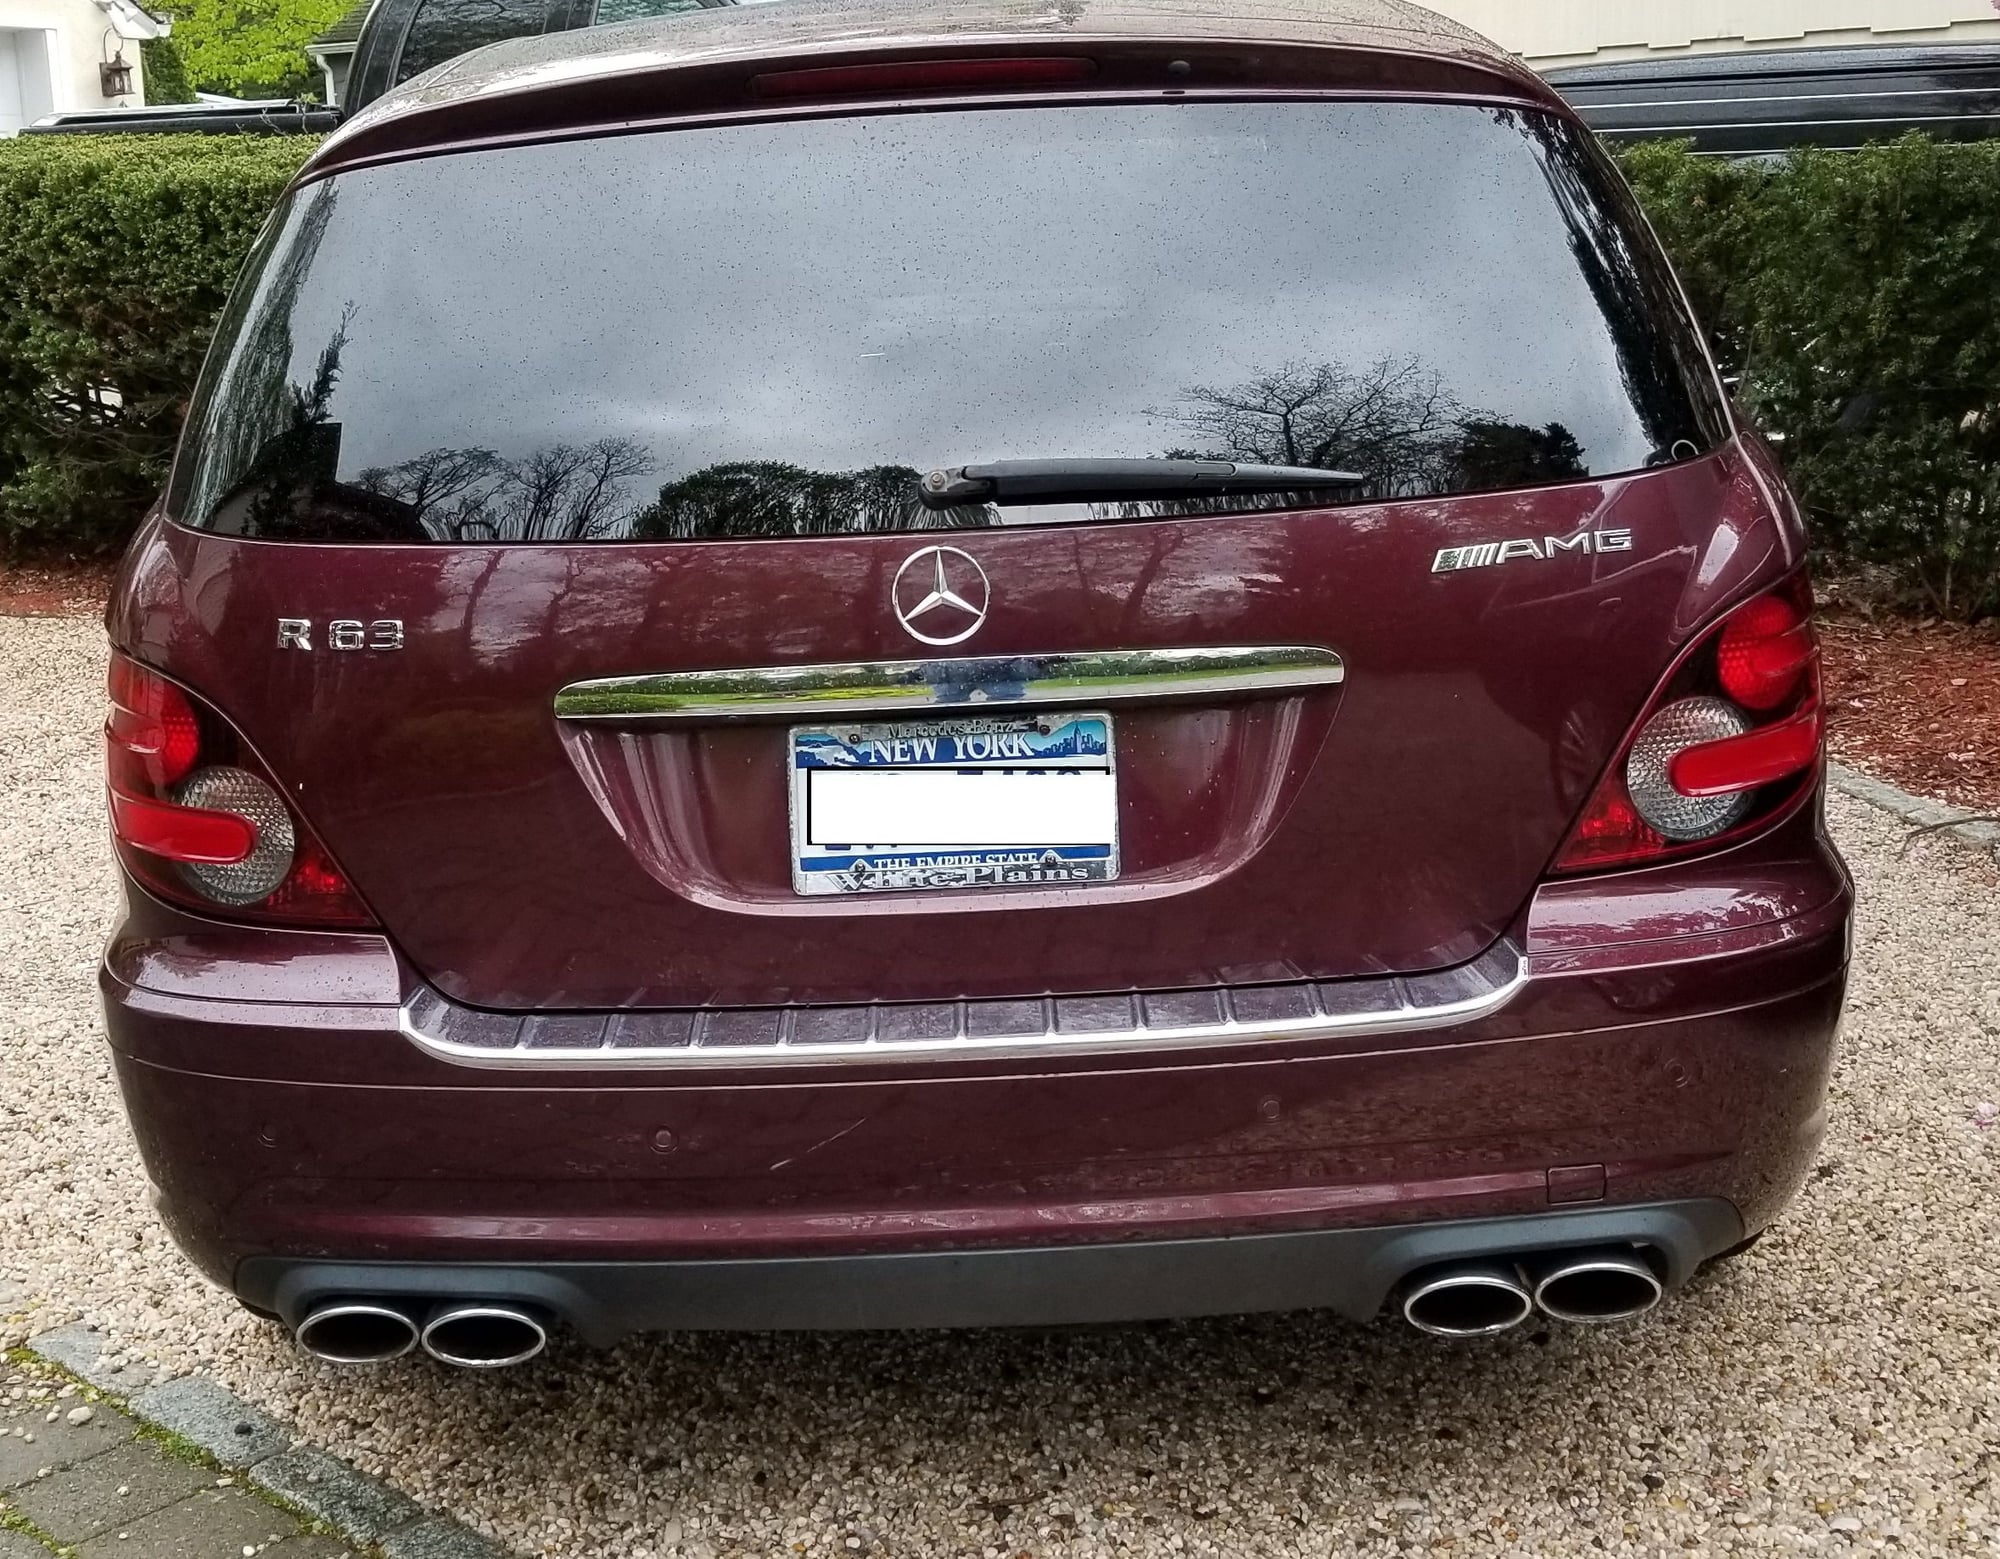 2007 Mercedes-Benz R63 AMG - Rare R63 runs great - Used - VIN JGCB77E37A048173 - 81,846 Miles - 8 cyl - AWD - Automatic - Wagon - Red - Scarsdale, NY 10583, United States